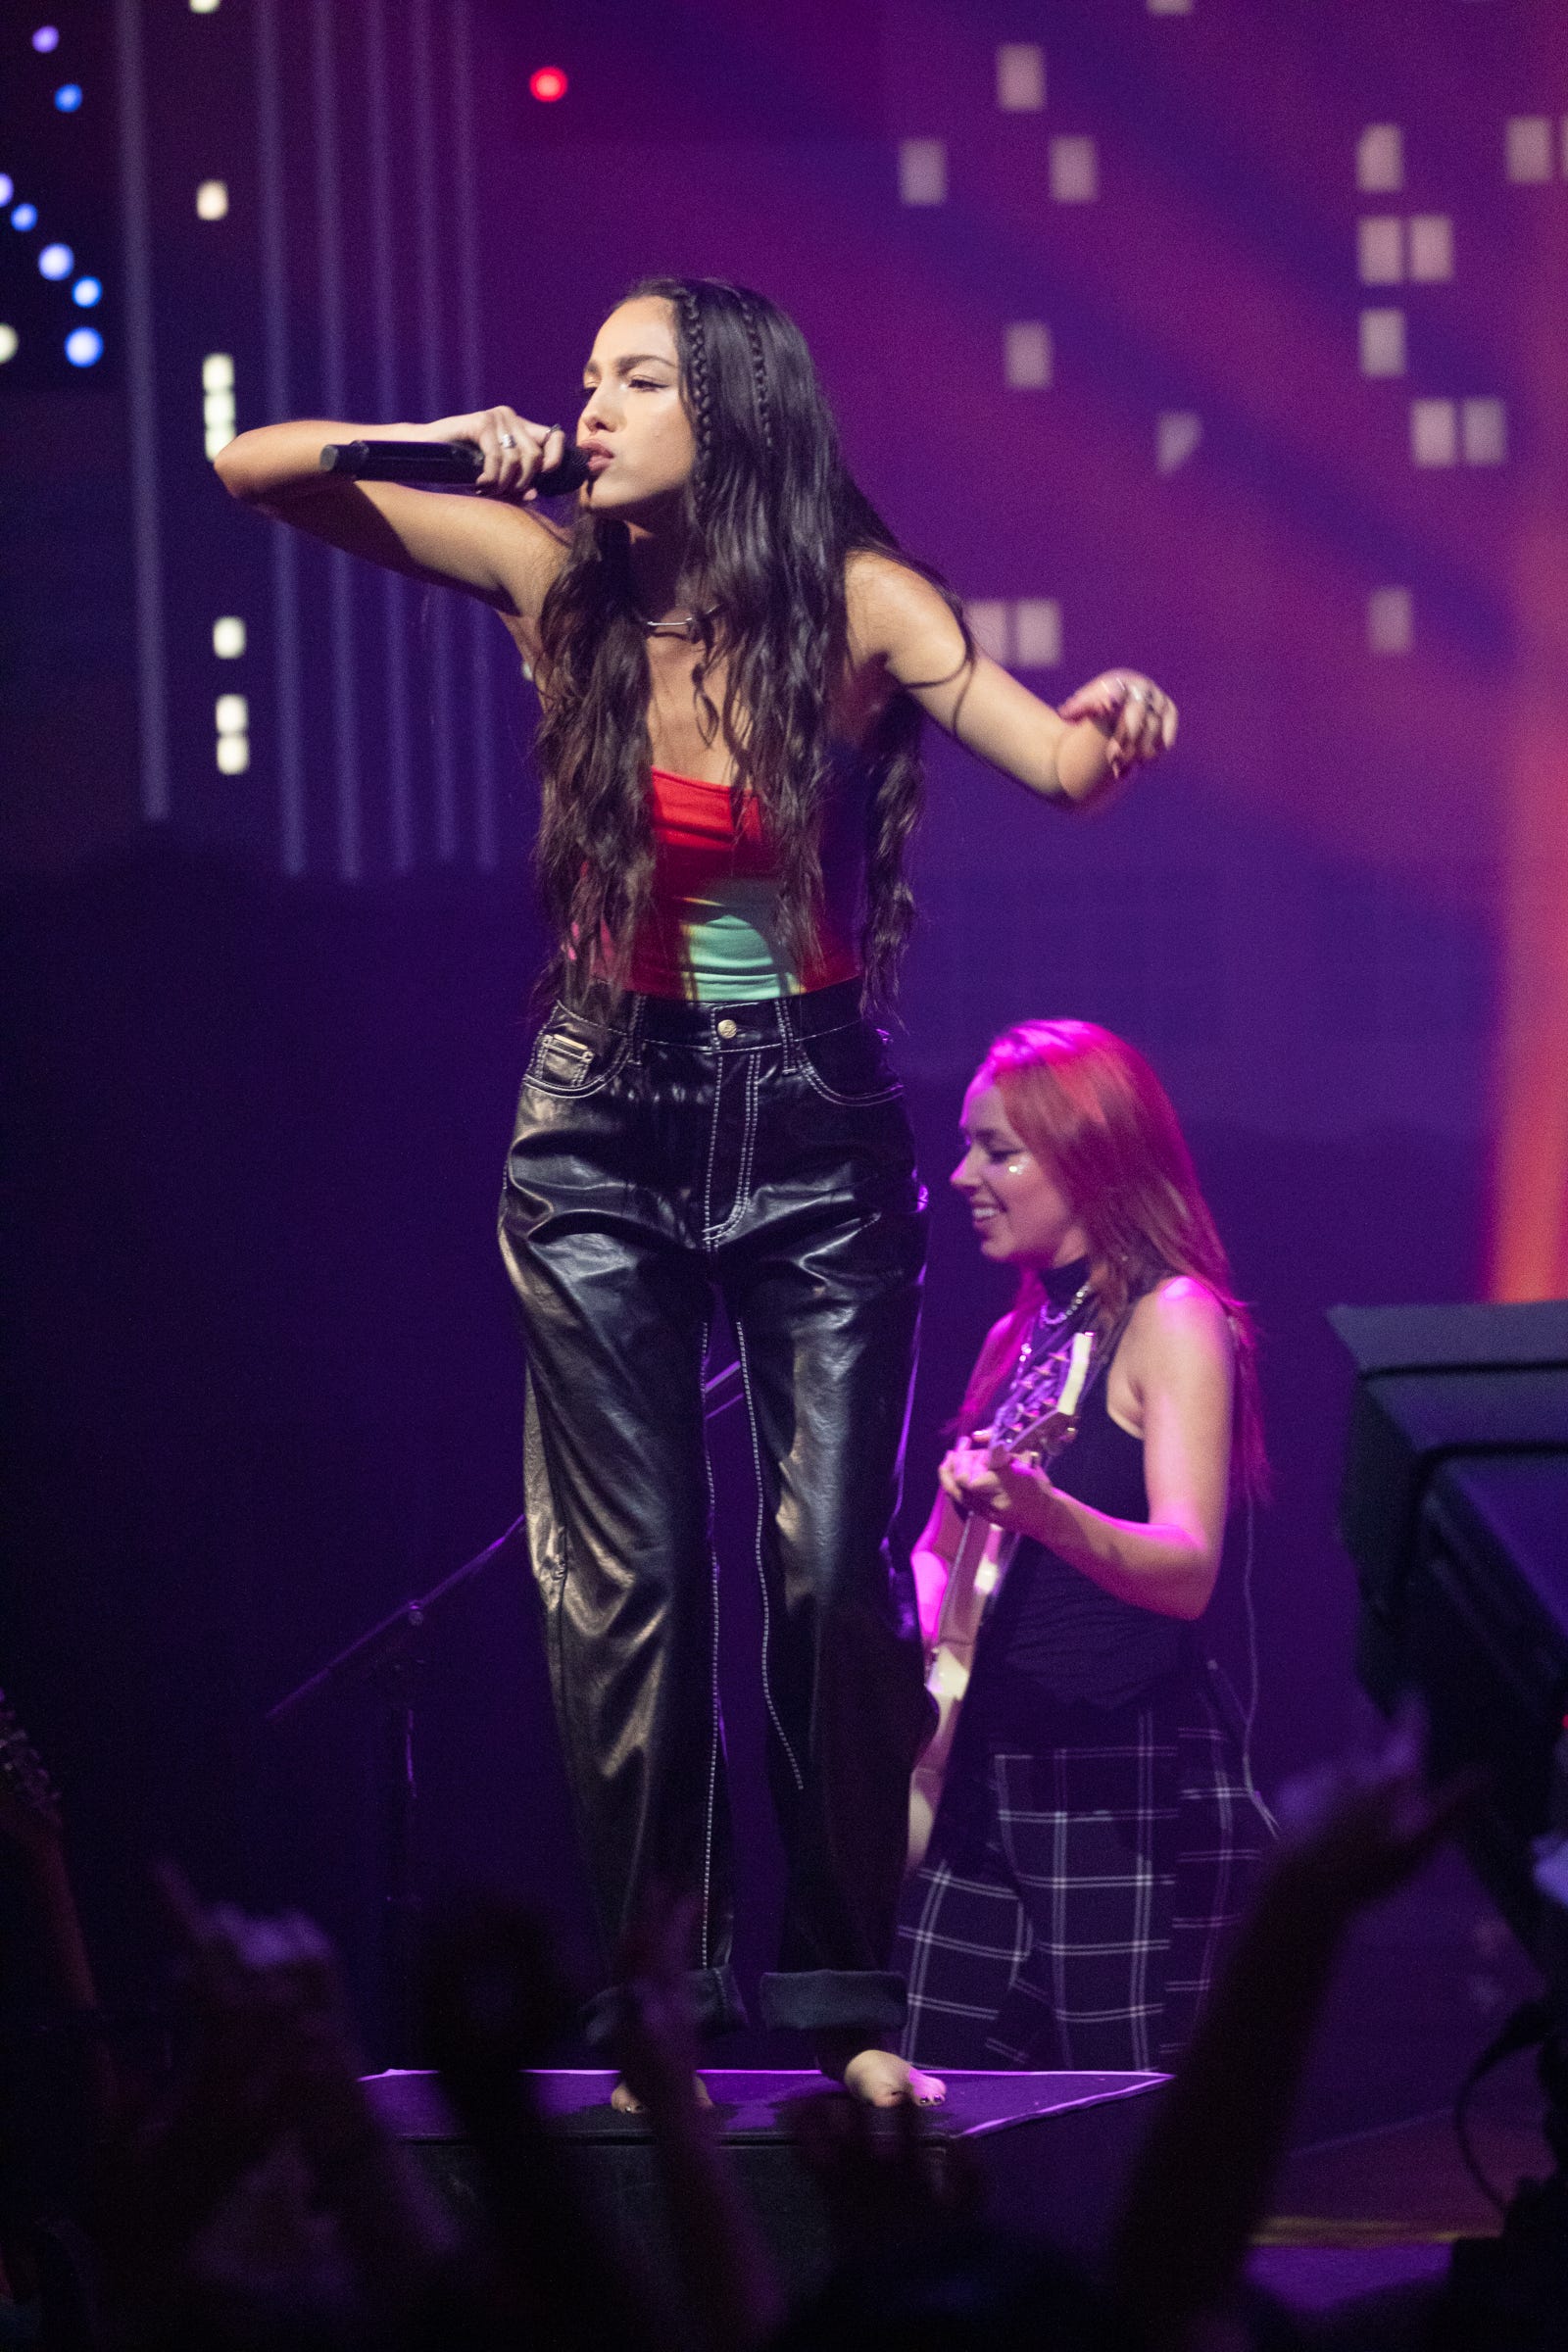 Teen pop sensation Olivia Rodrigo makes her debut on the "Austin City Limits" stage on Saturday, Oct. 2, 2021, at ACL Live. Her episode will air as part of Season 47.